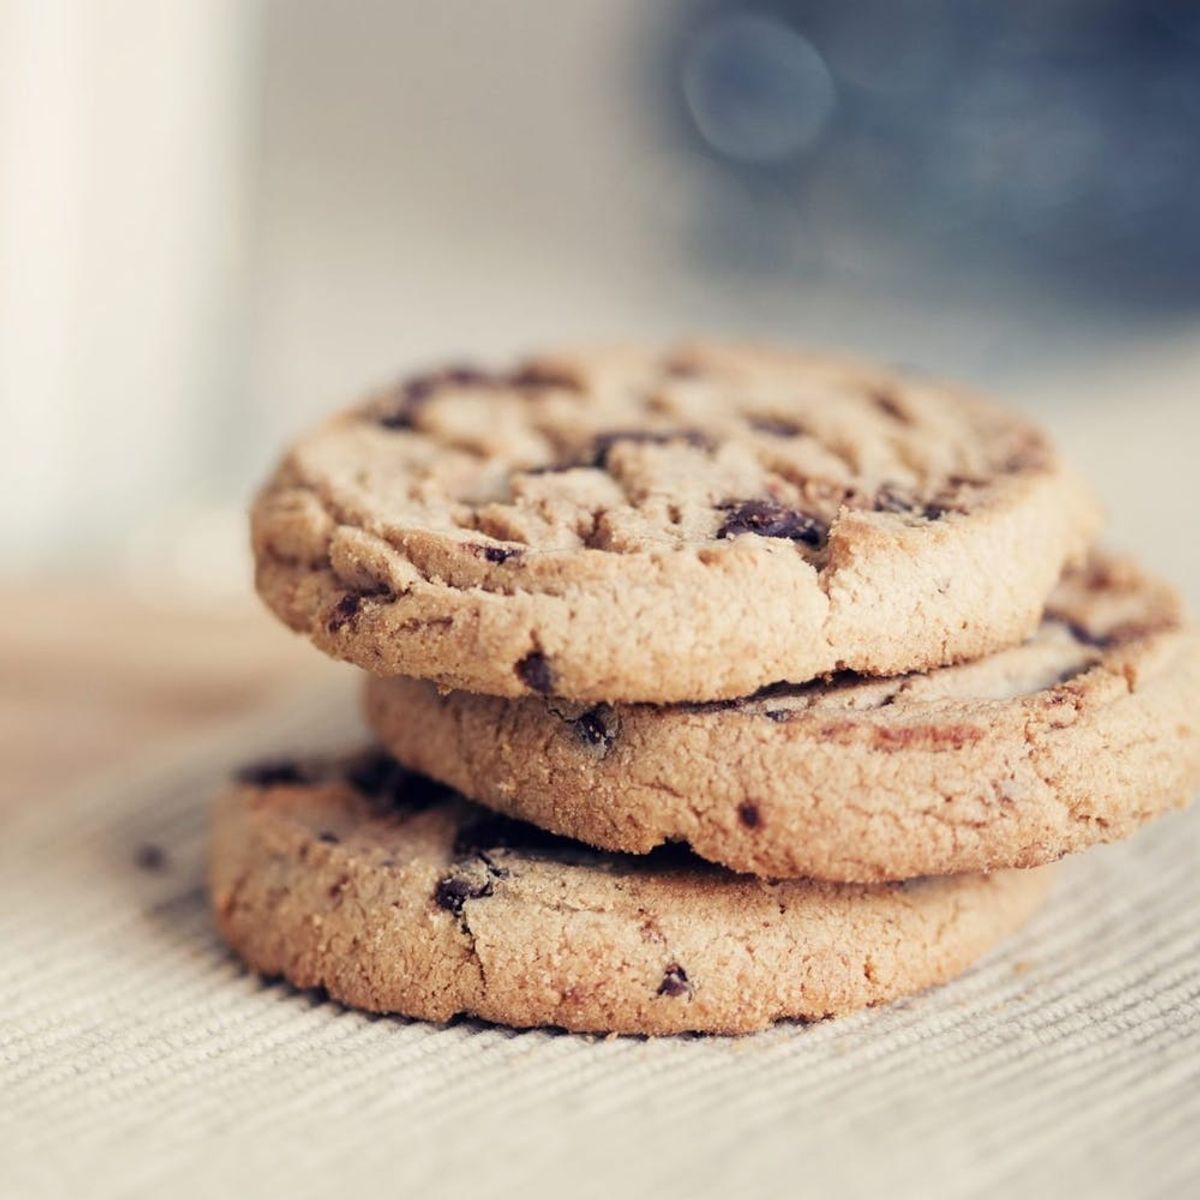 Here’s Where You Can Score Free Goodies for National Cookie Day!